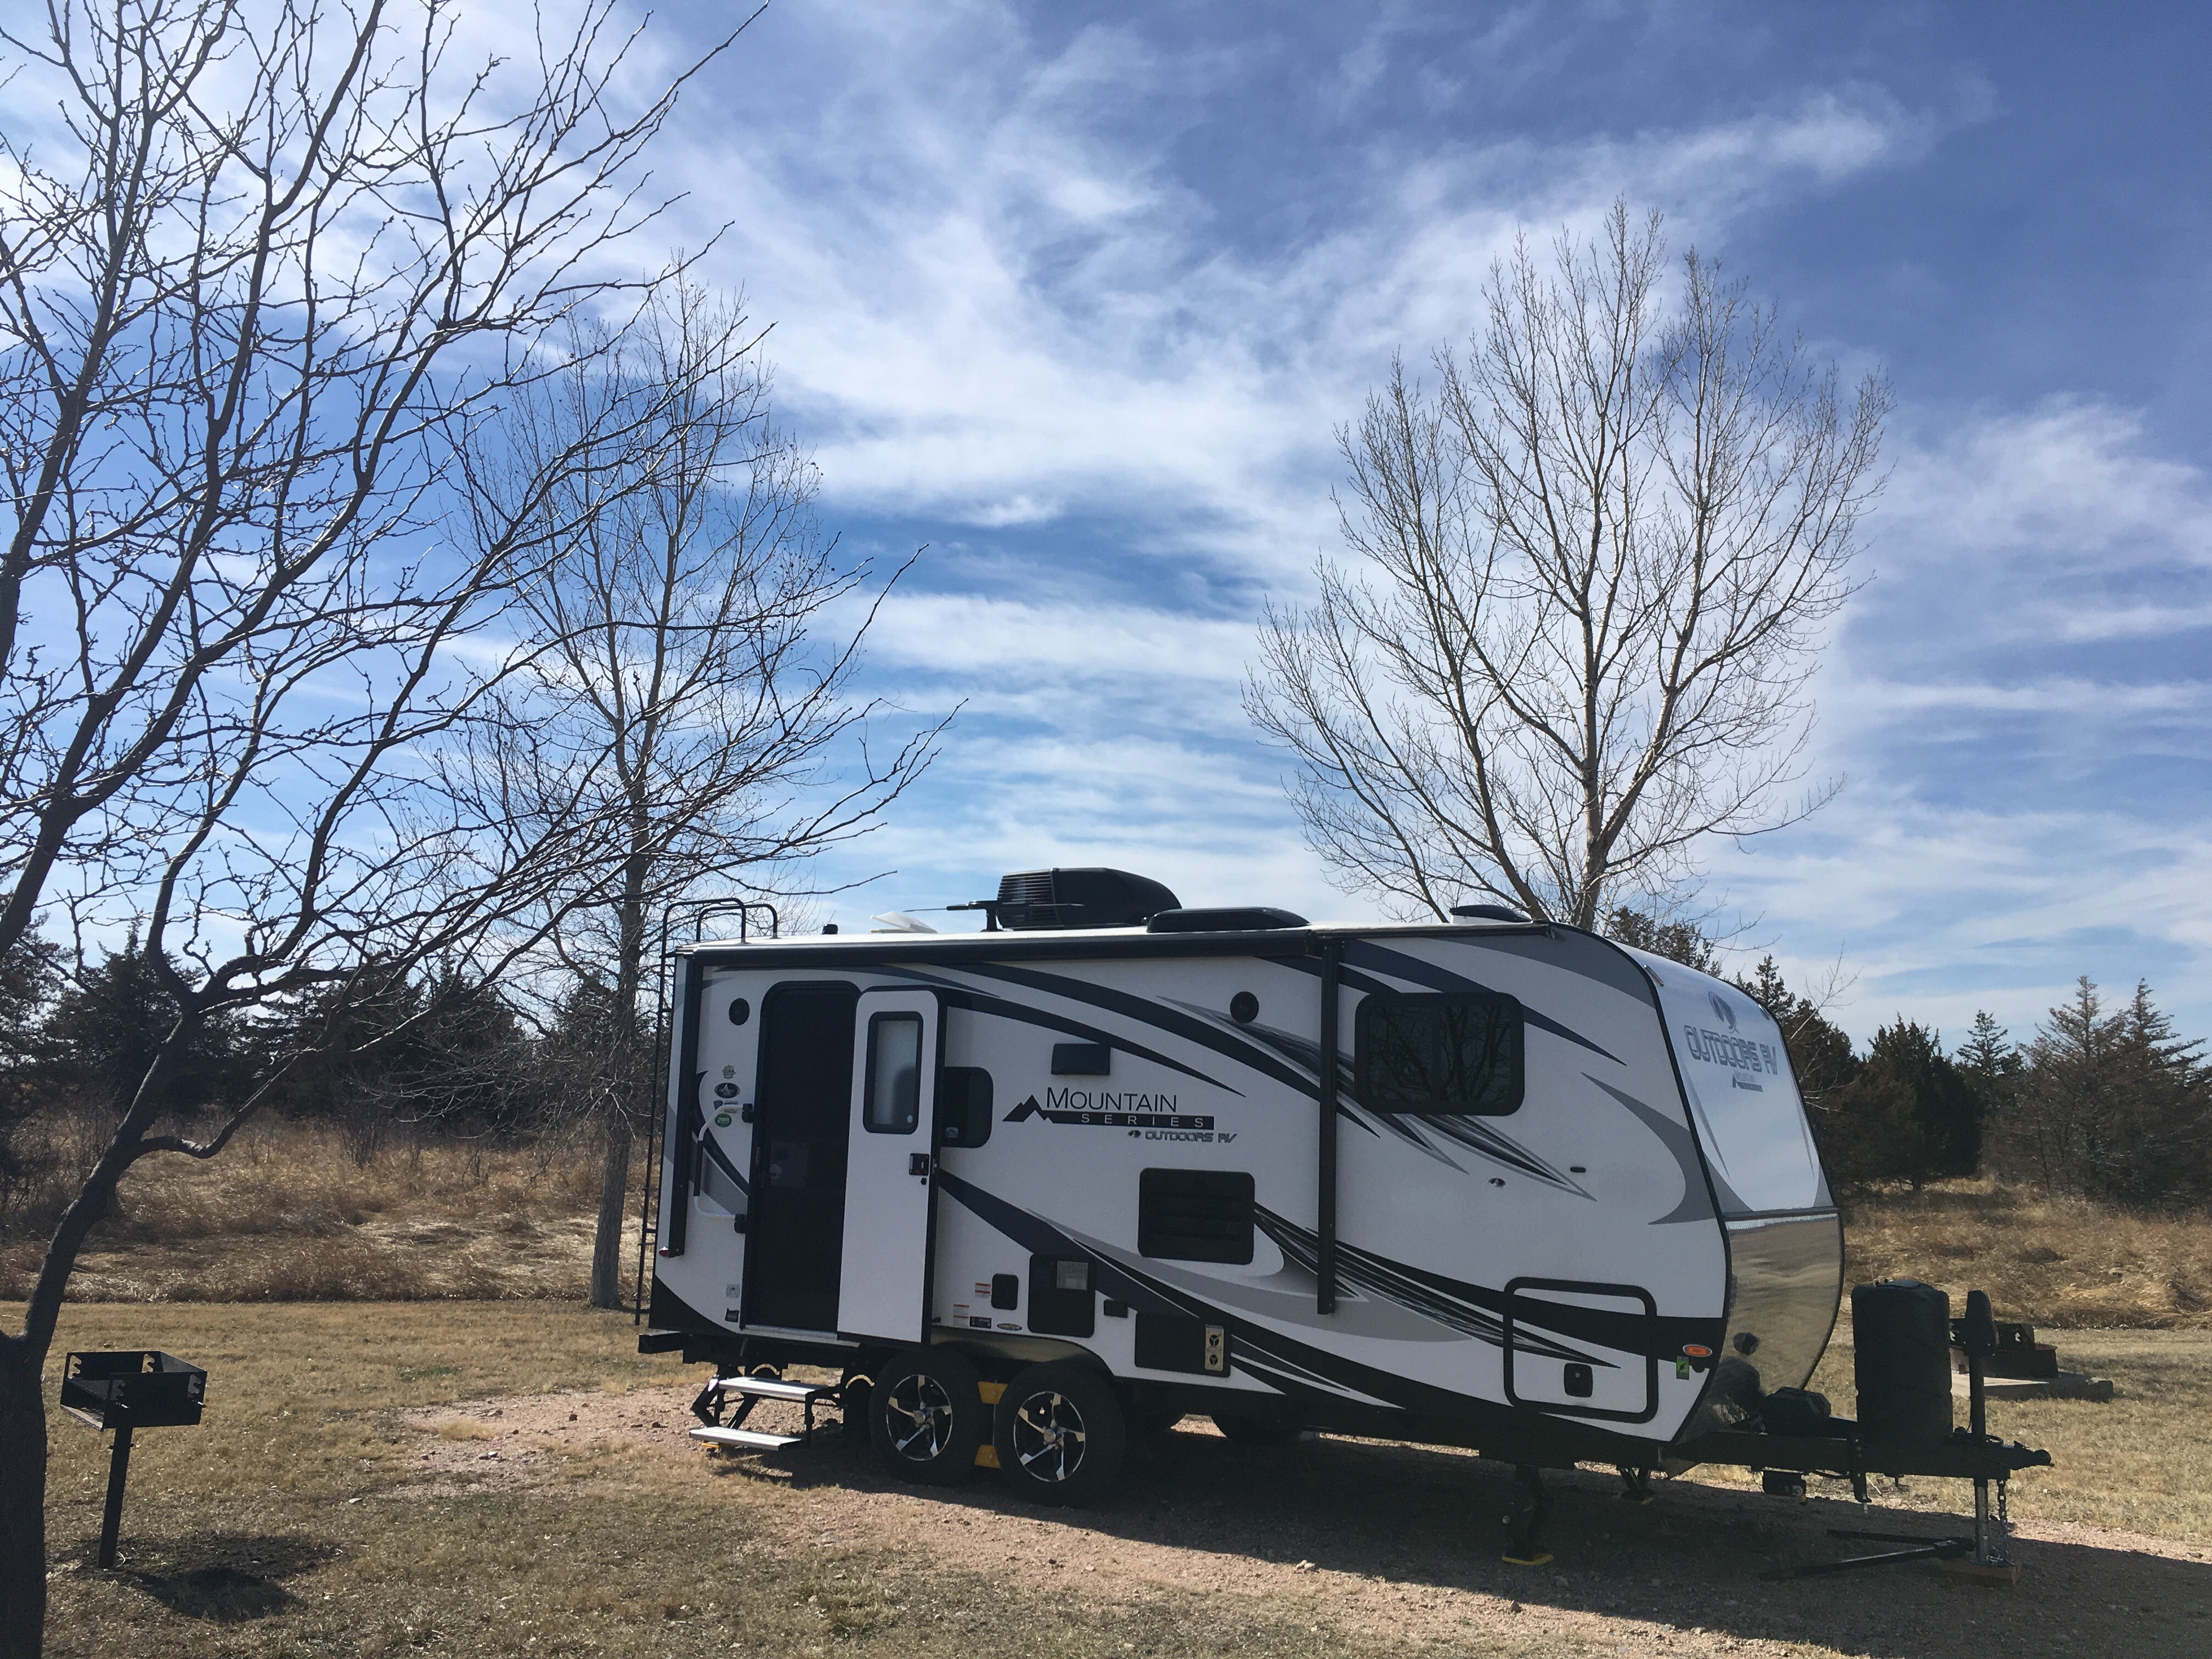 Camper submitted image from Buffalo Bill Ranch State Recreation Area - 3